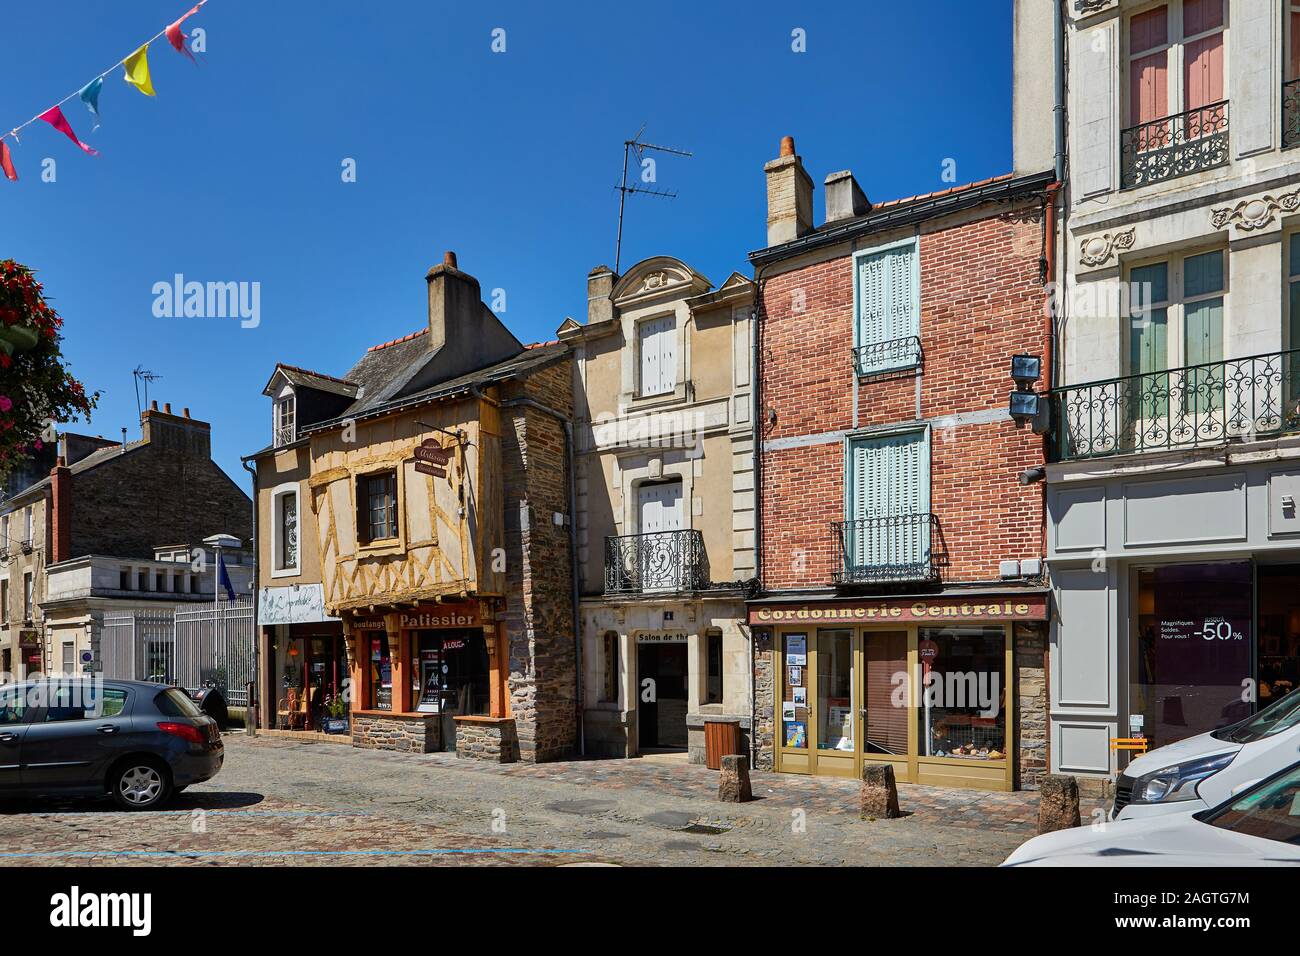 Image of Redon, Brittany, France.  Redon is a popular tourist destination in Southern Brittany with medeval buildings, shopping, train station, restau Stock Photo